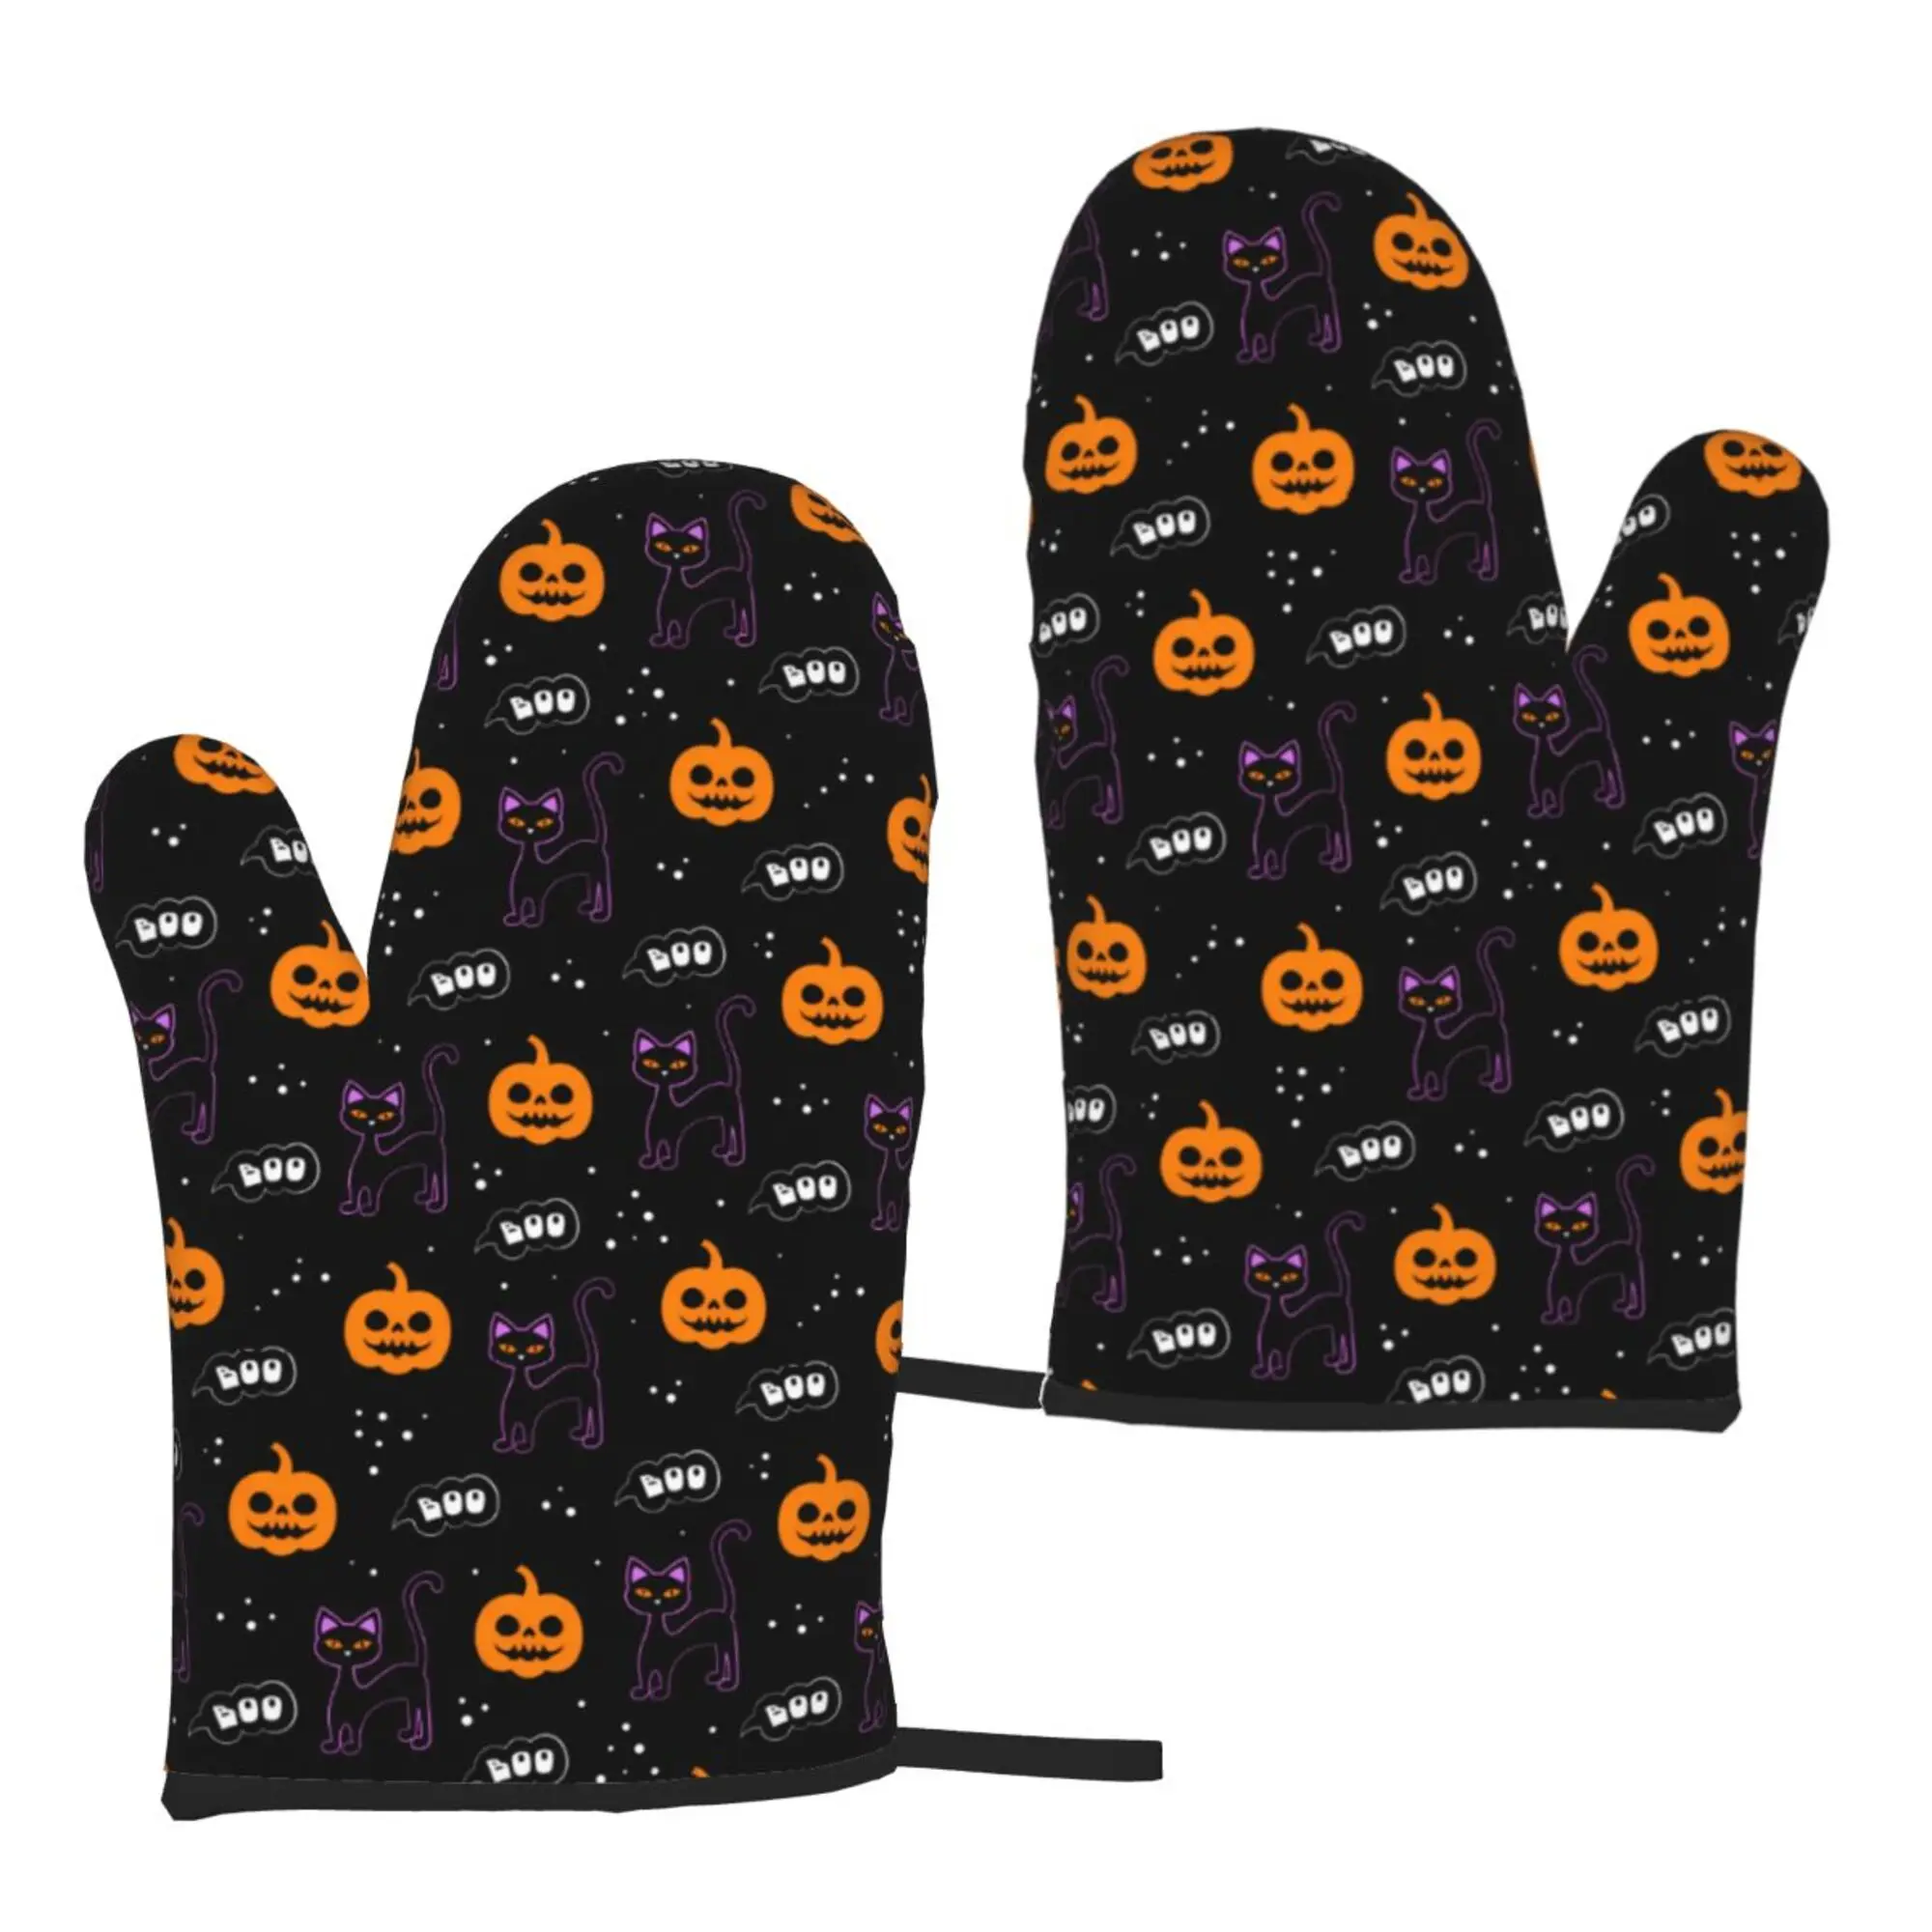 Black Cat Boo Pumpkin Halloween Oven Mitts 2pc Microwave Gloves Bbq Cooking Gloves Heat Resistant Kitchen Gloves One Size black cat boo pumpkin halloween oven mitts 2pc microwave gloves bbq cooking gloves heat resistant kitchen gloves one size